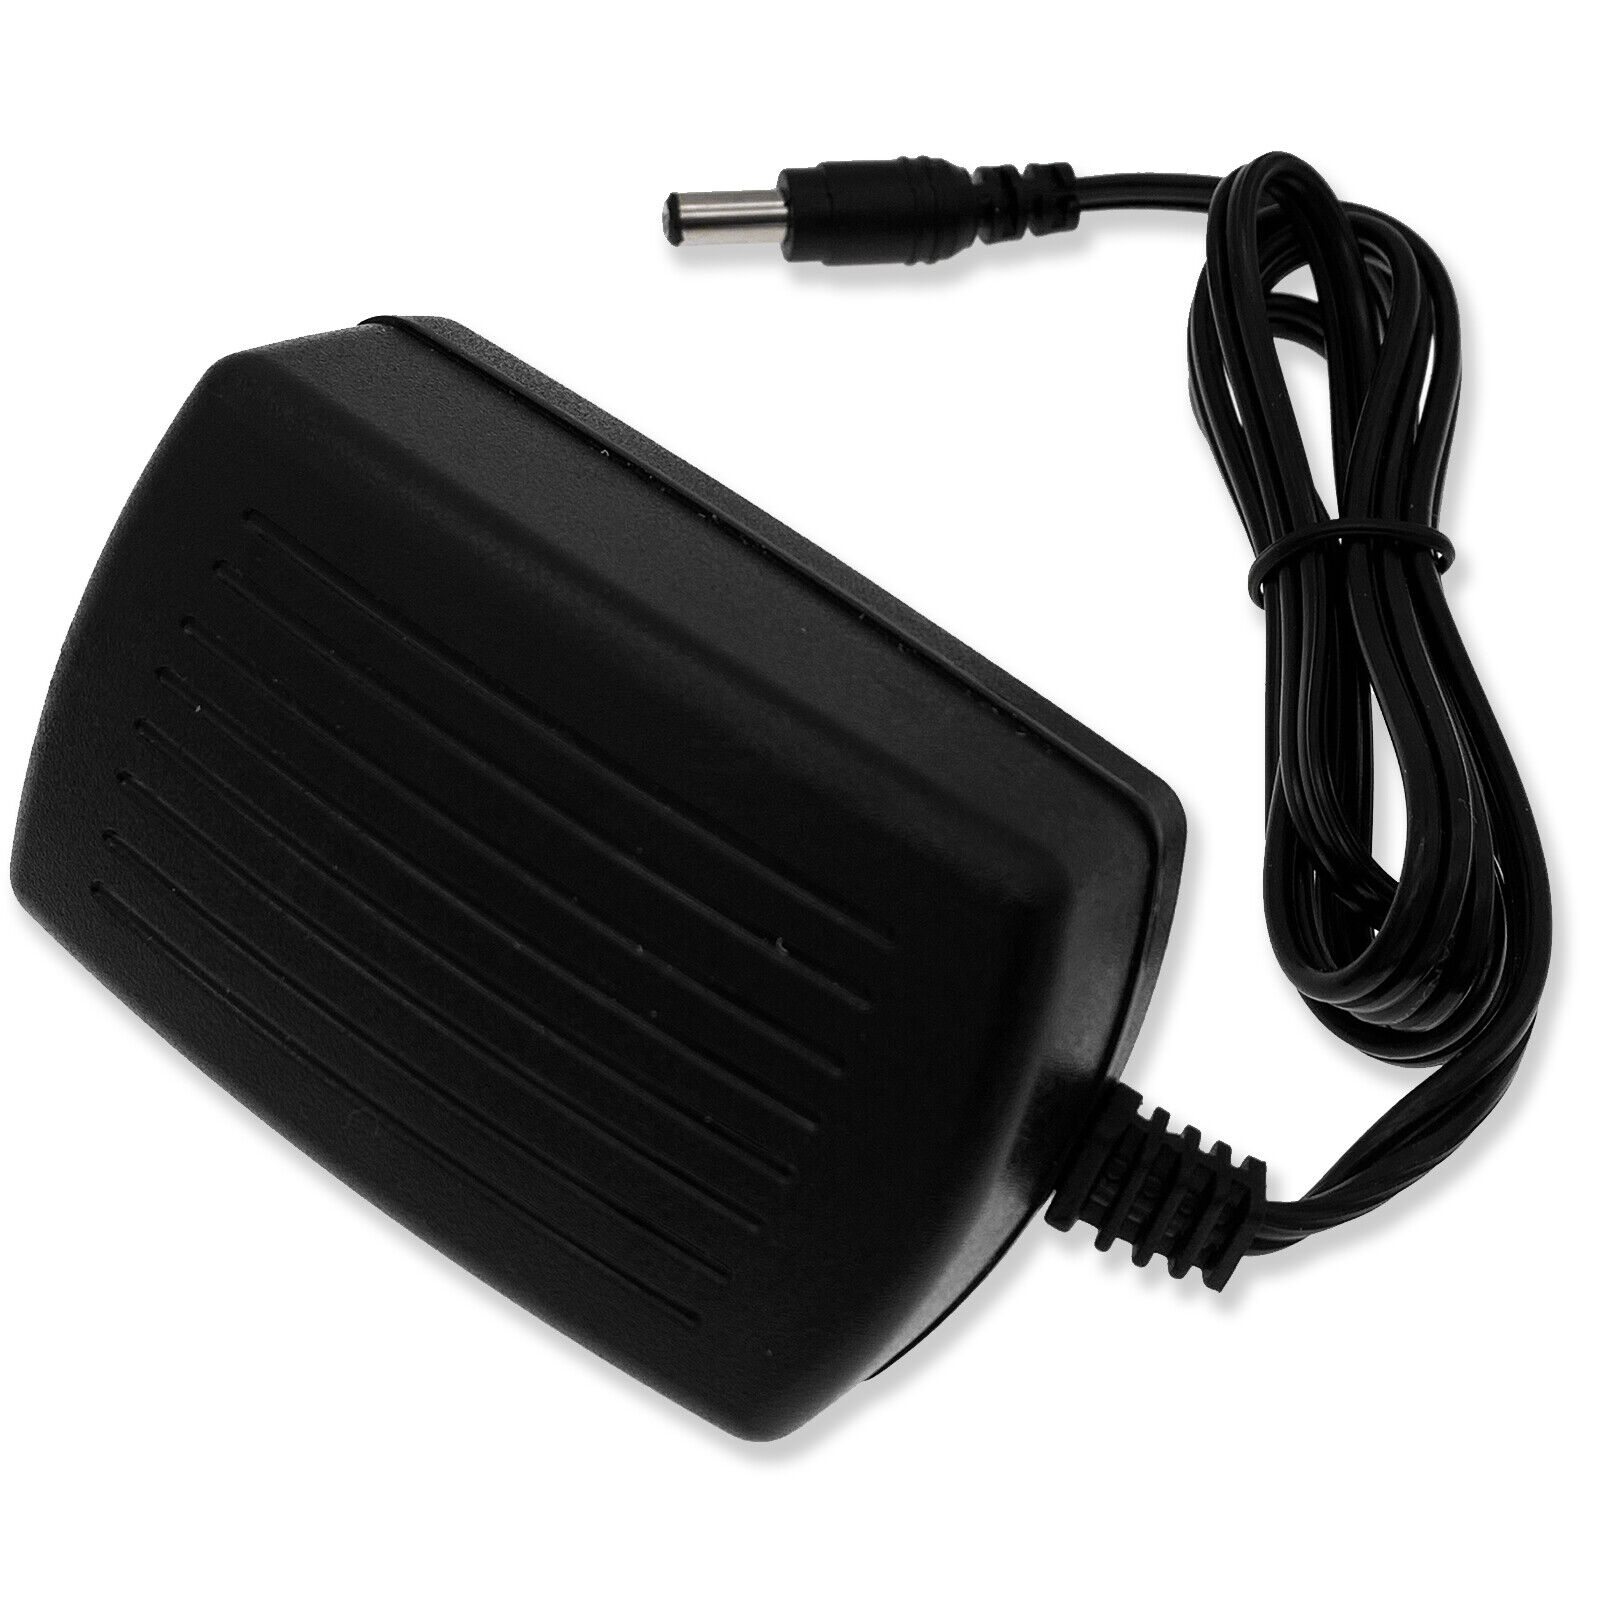 12.6V 1A Switching power supply charger for 3S 12V Li-ion battery DC connector Voltage 12.6V Unit Type Unit Compatib